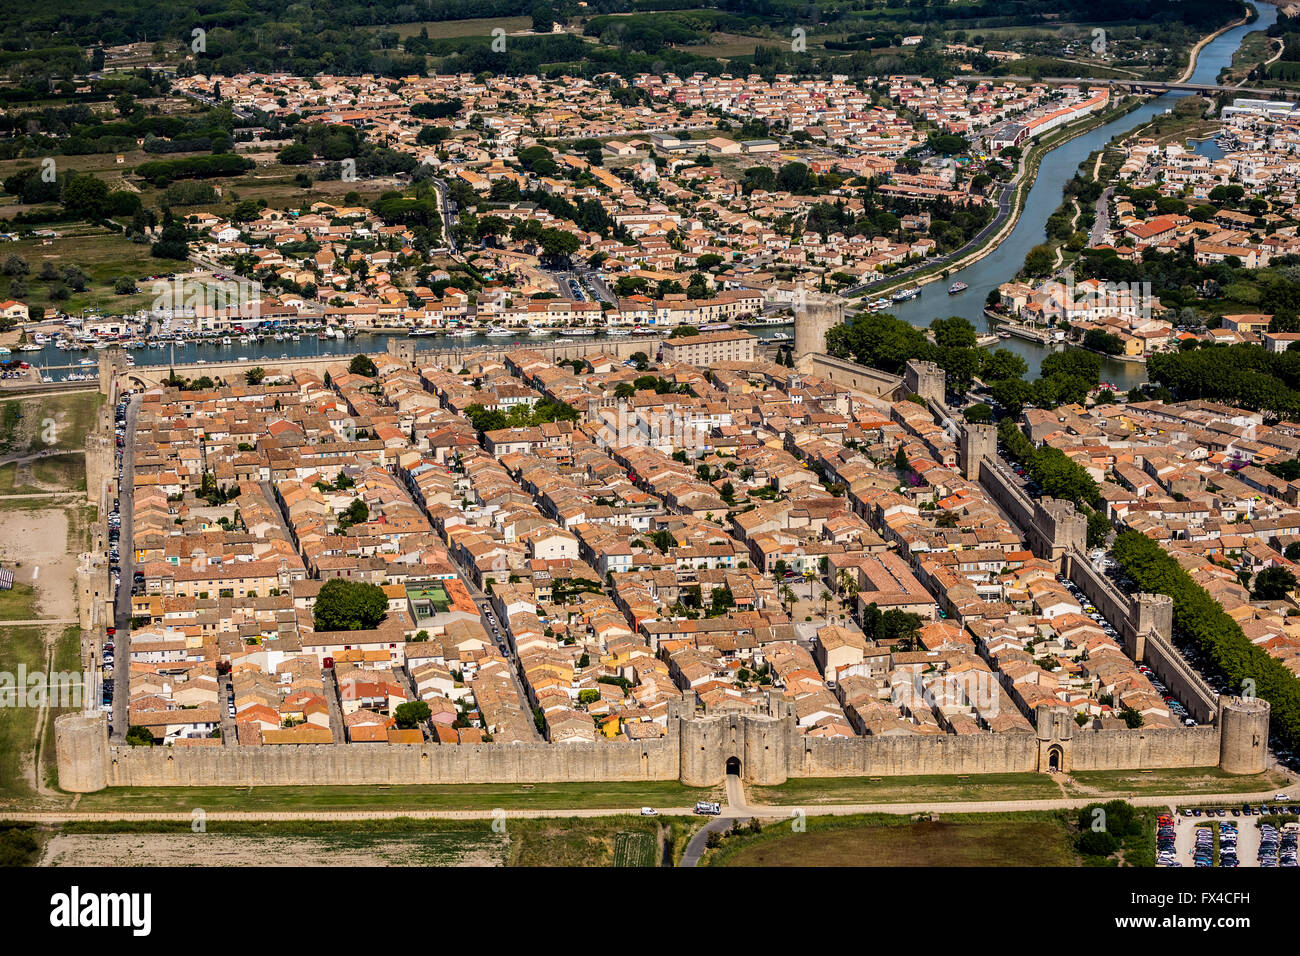 Aerial view, Medieval town with a rectangular walled city, southern France, Midi, Aigues-Mortes, France, Languedoc-Roussillon, Stock Photo